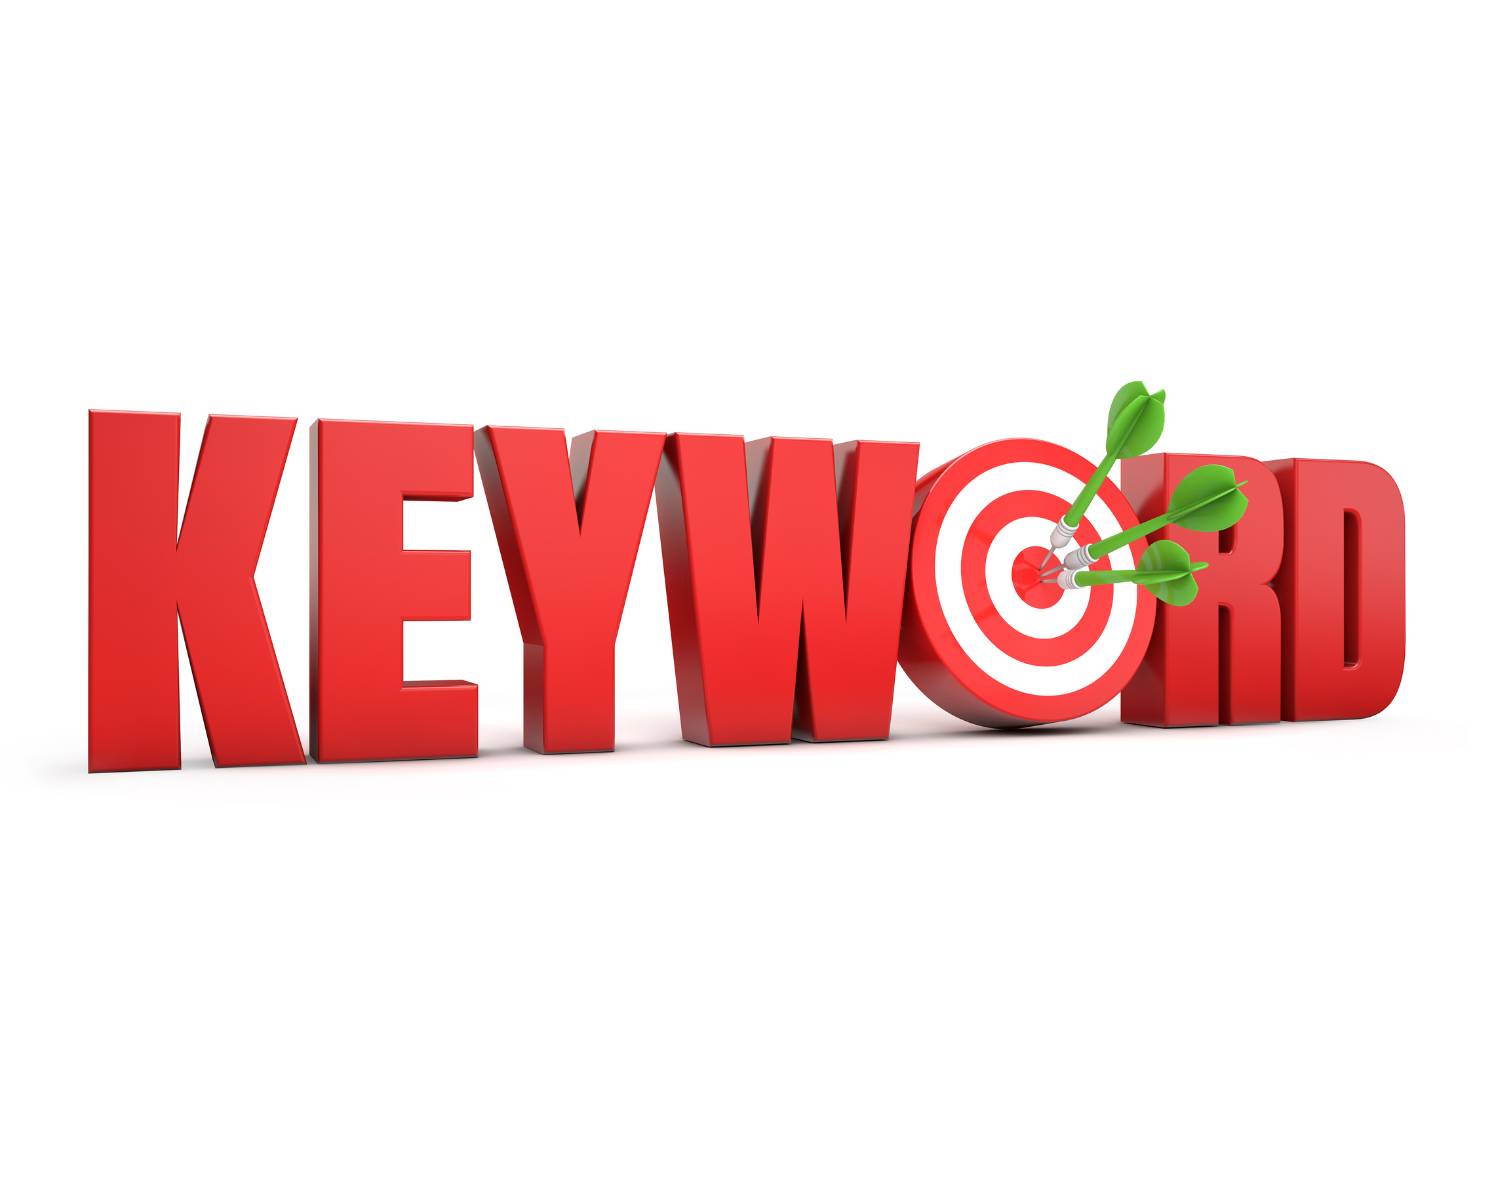 What are the 3 main factors that go into choosing a keyword? Keyword research is vital to a topical niche website.